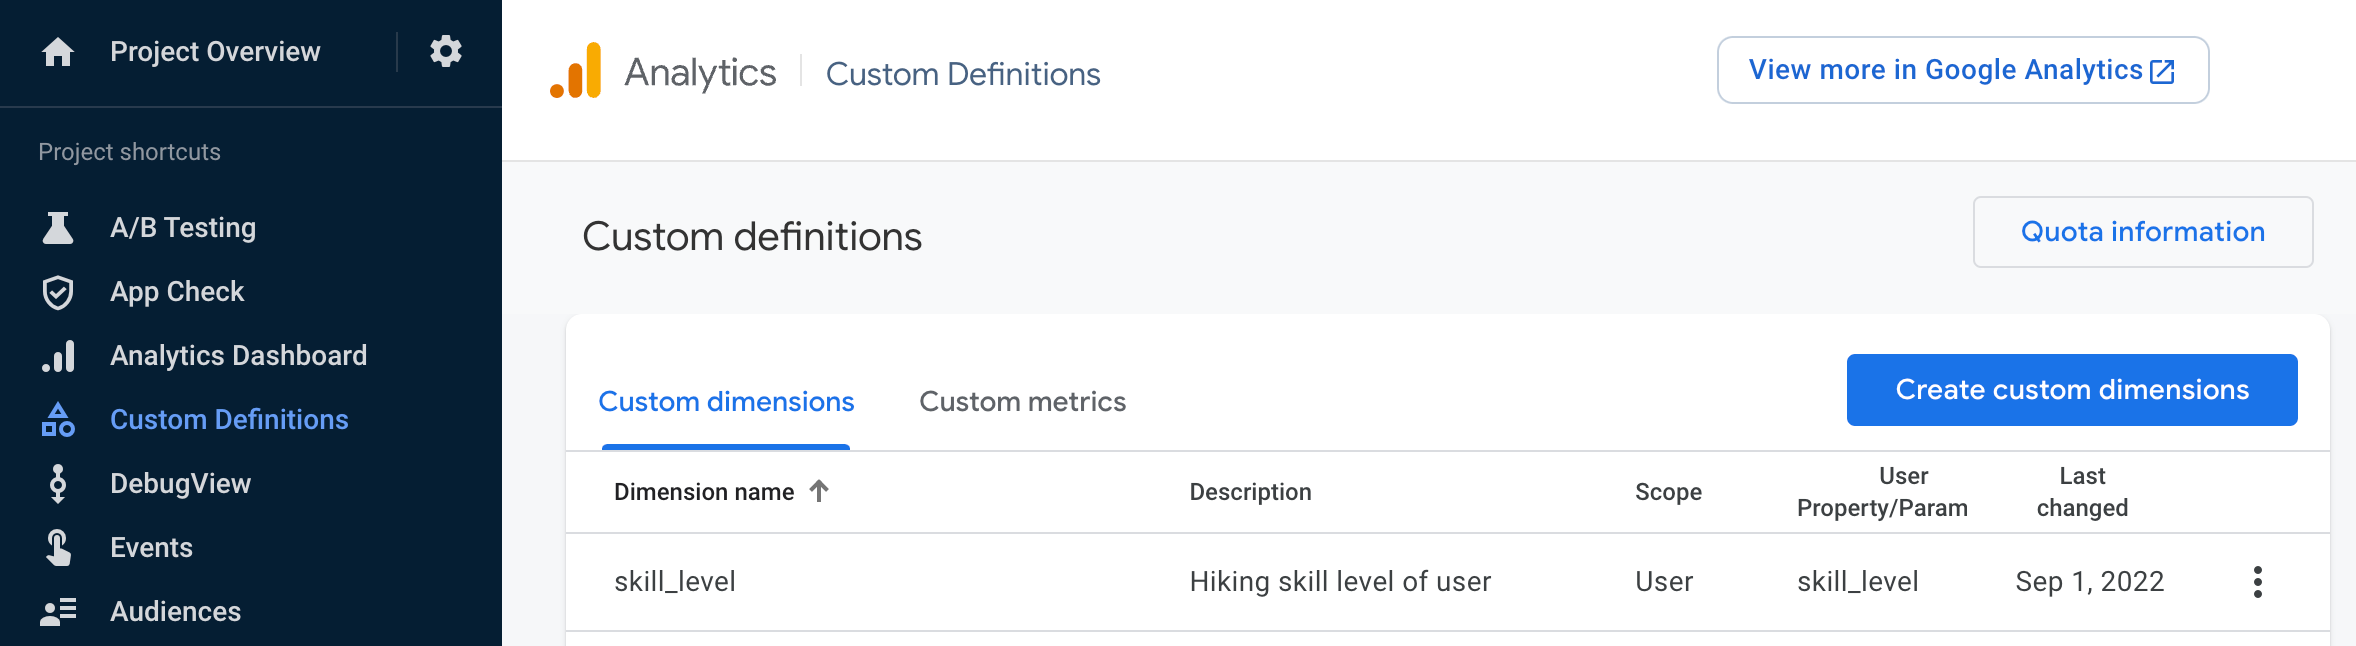 You can then view your custom dimensions in the custom definitions dashboard.